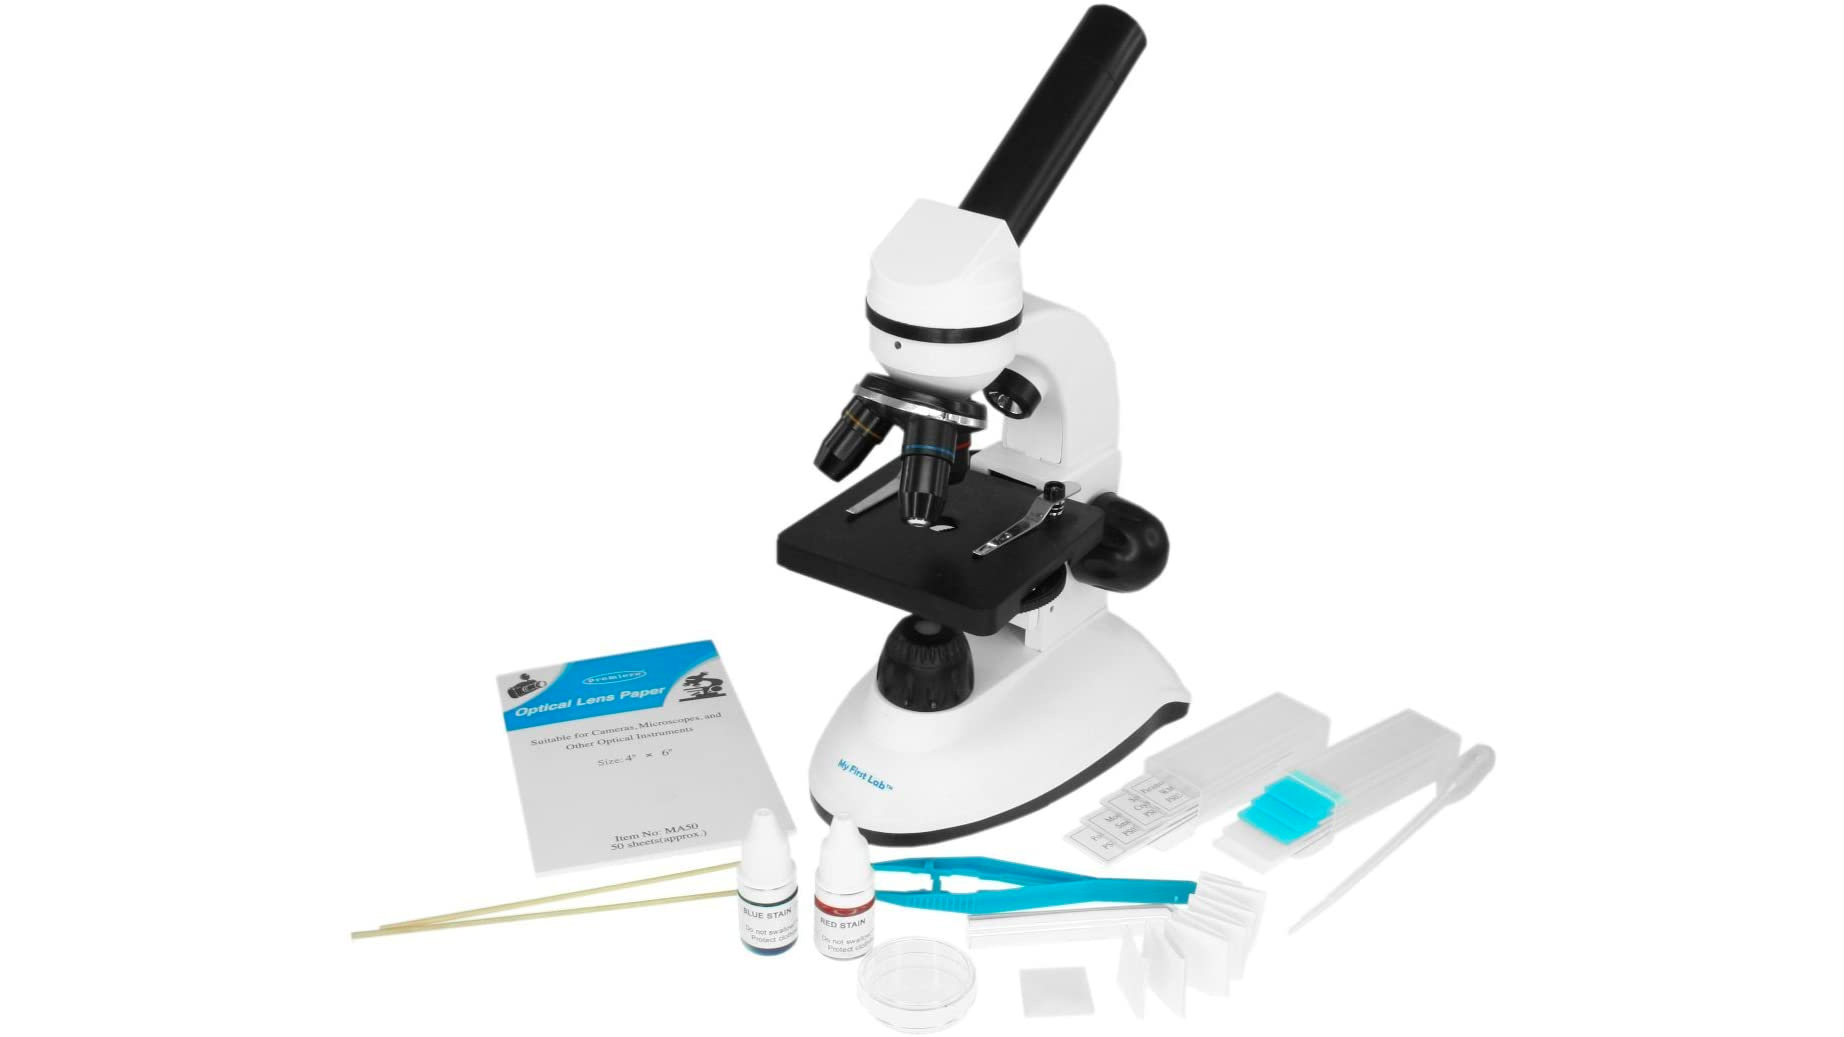 My First Lab Duo-Scope Microscope - an excellent choice for biology